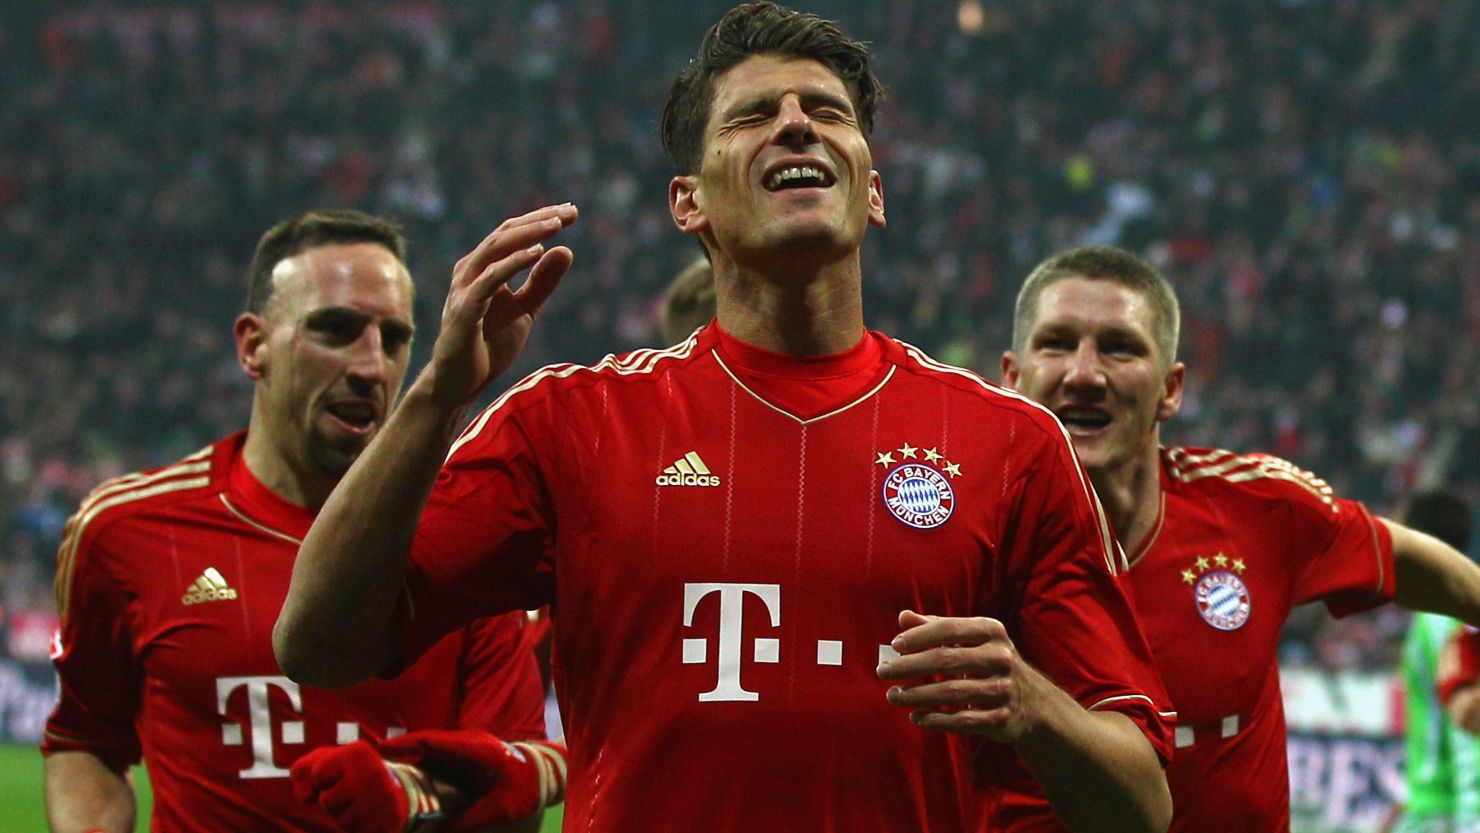 Mario Gomez celebrates scoring the opening goal for Bayern Munich in a 2-0 win against Wolfsburg